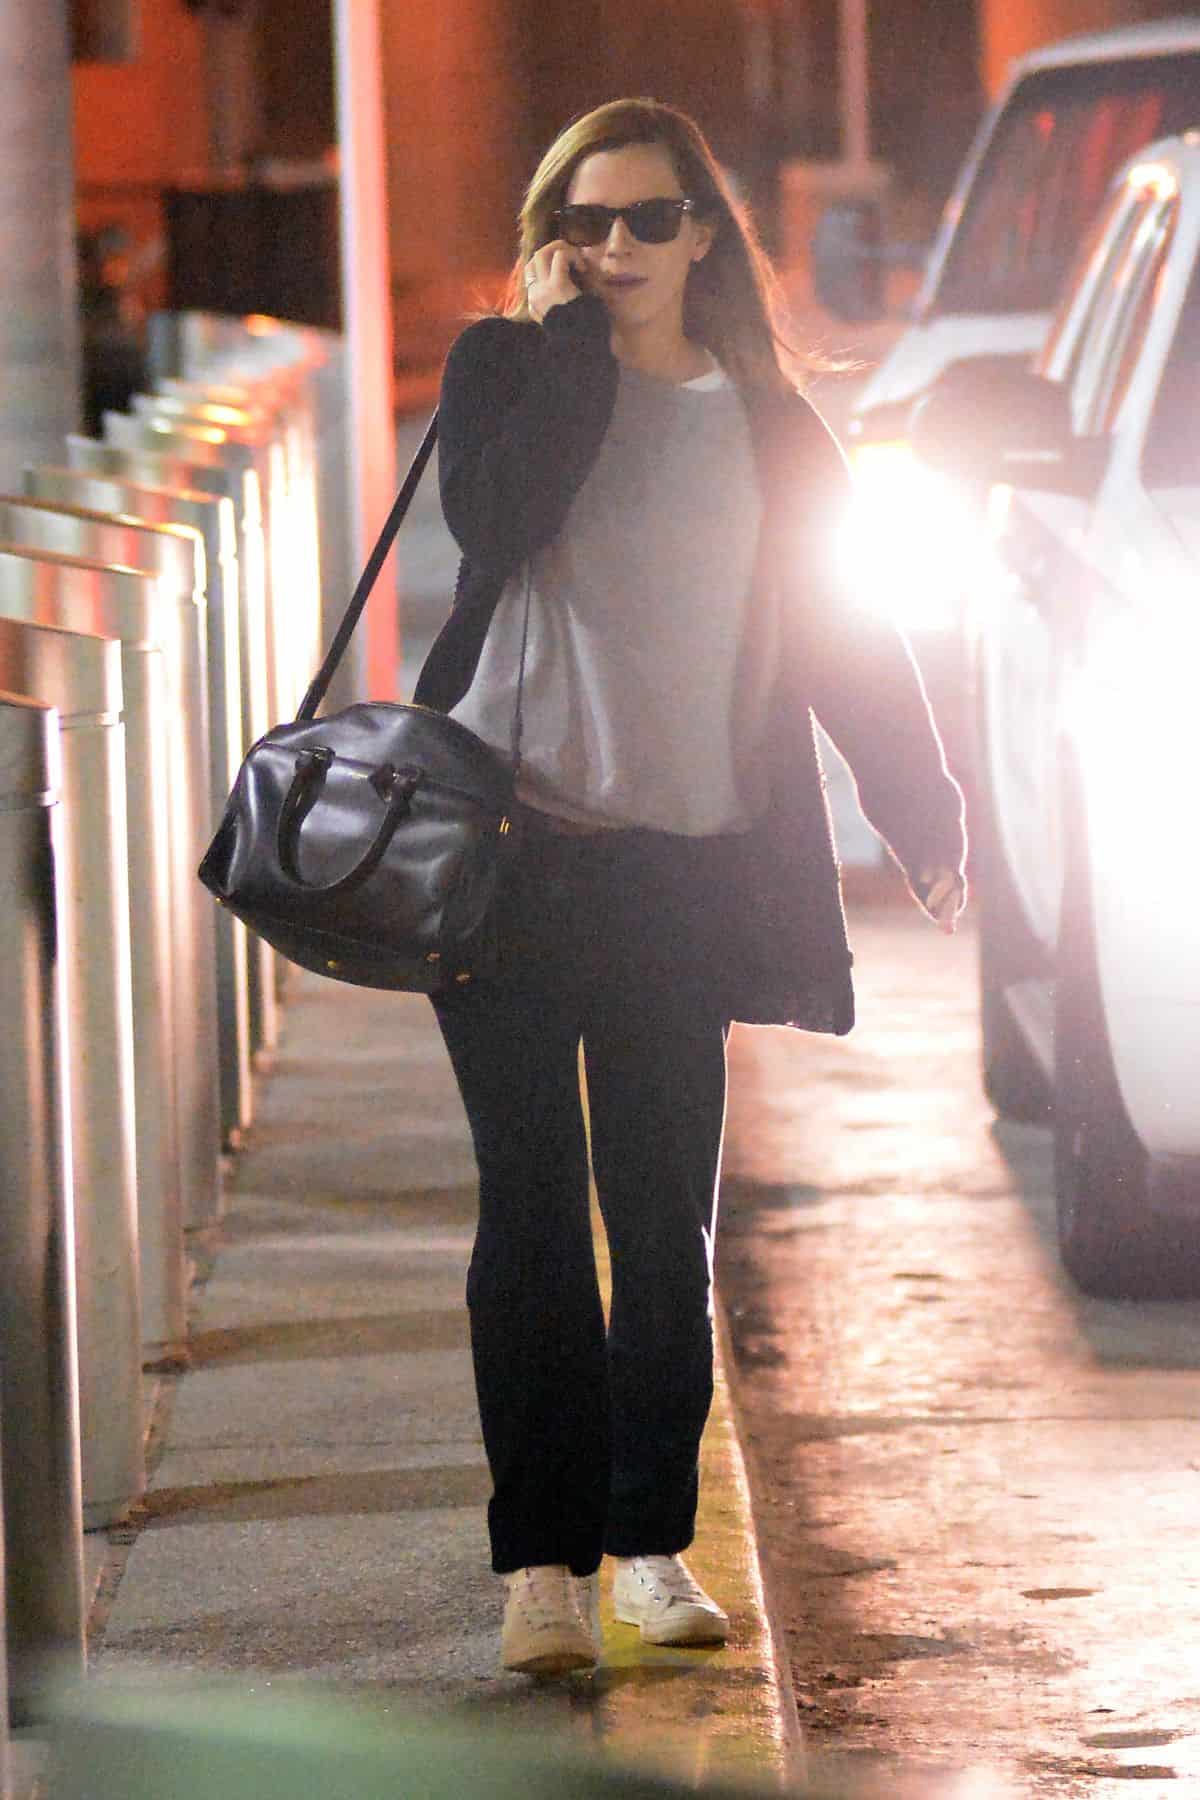 Emma Watson in a Comfy Outfit Exposing her Lace Underwear at JFK Airport